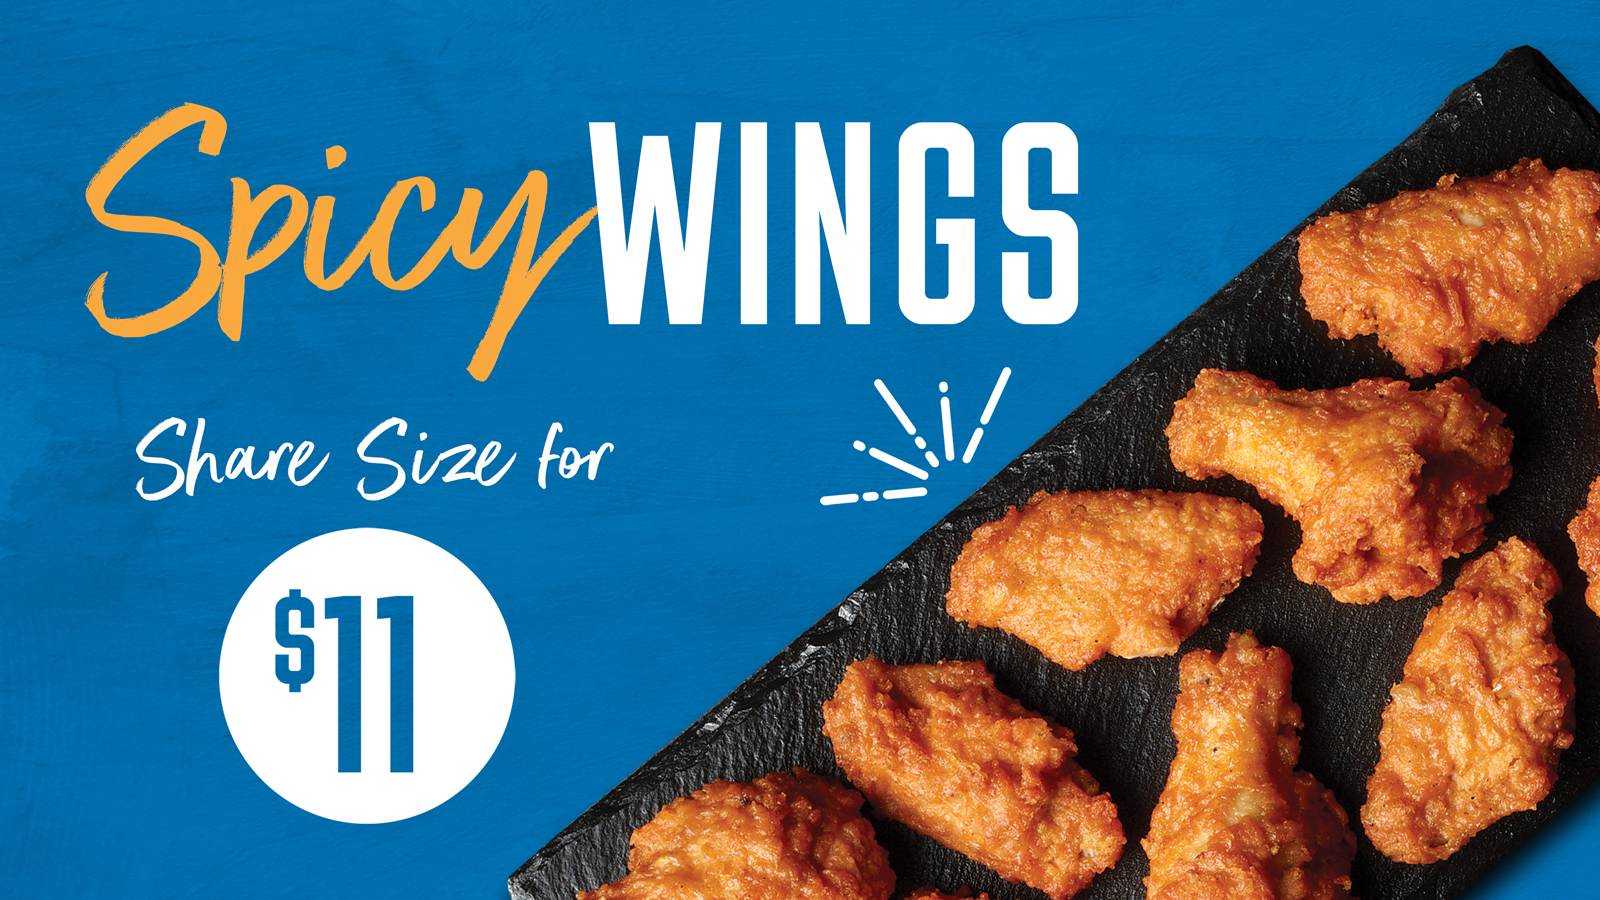 Spicy wings are our best seller! Come in to our 24 hr convenience store for our lunch menu today!